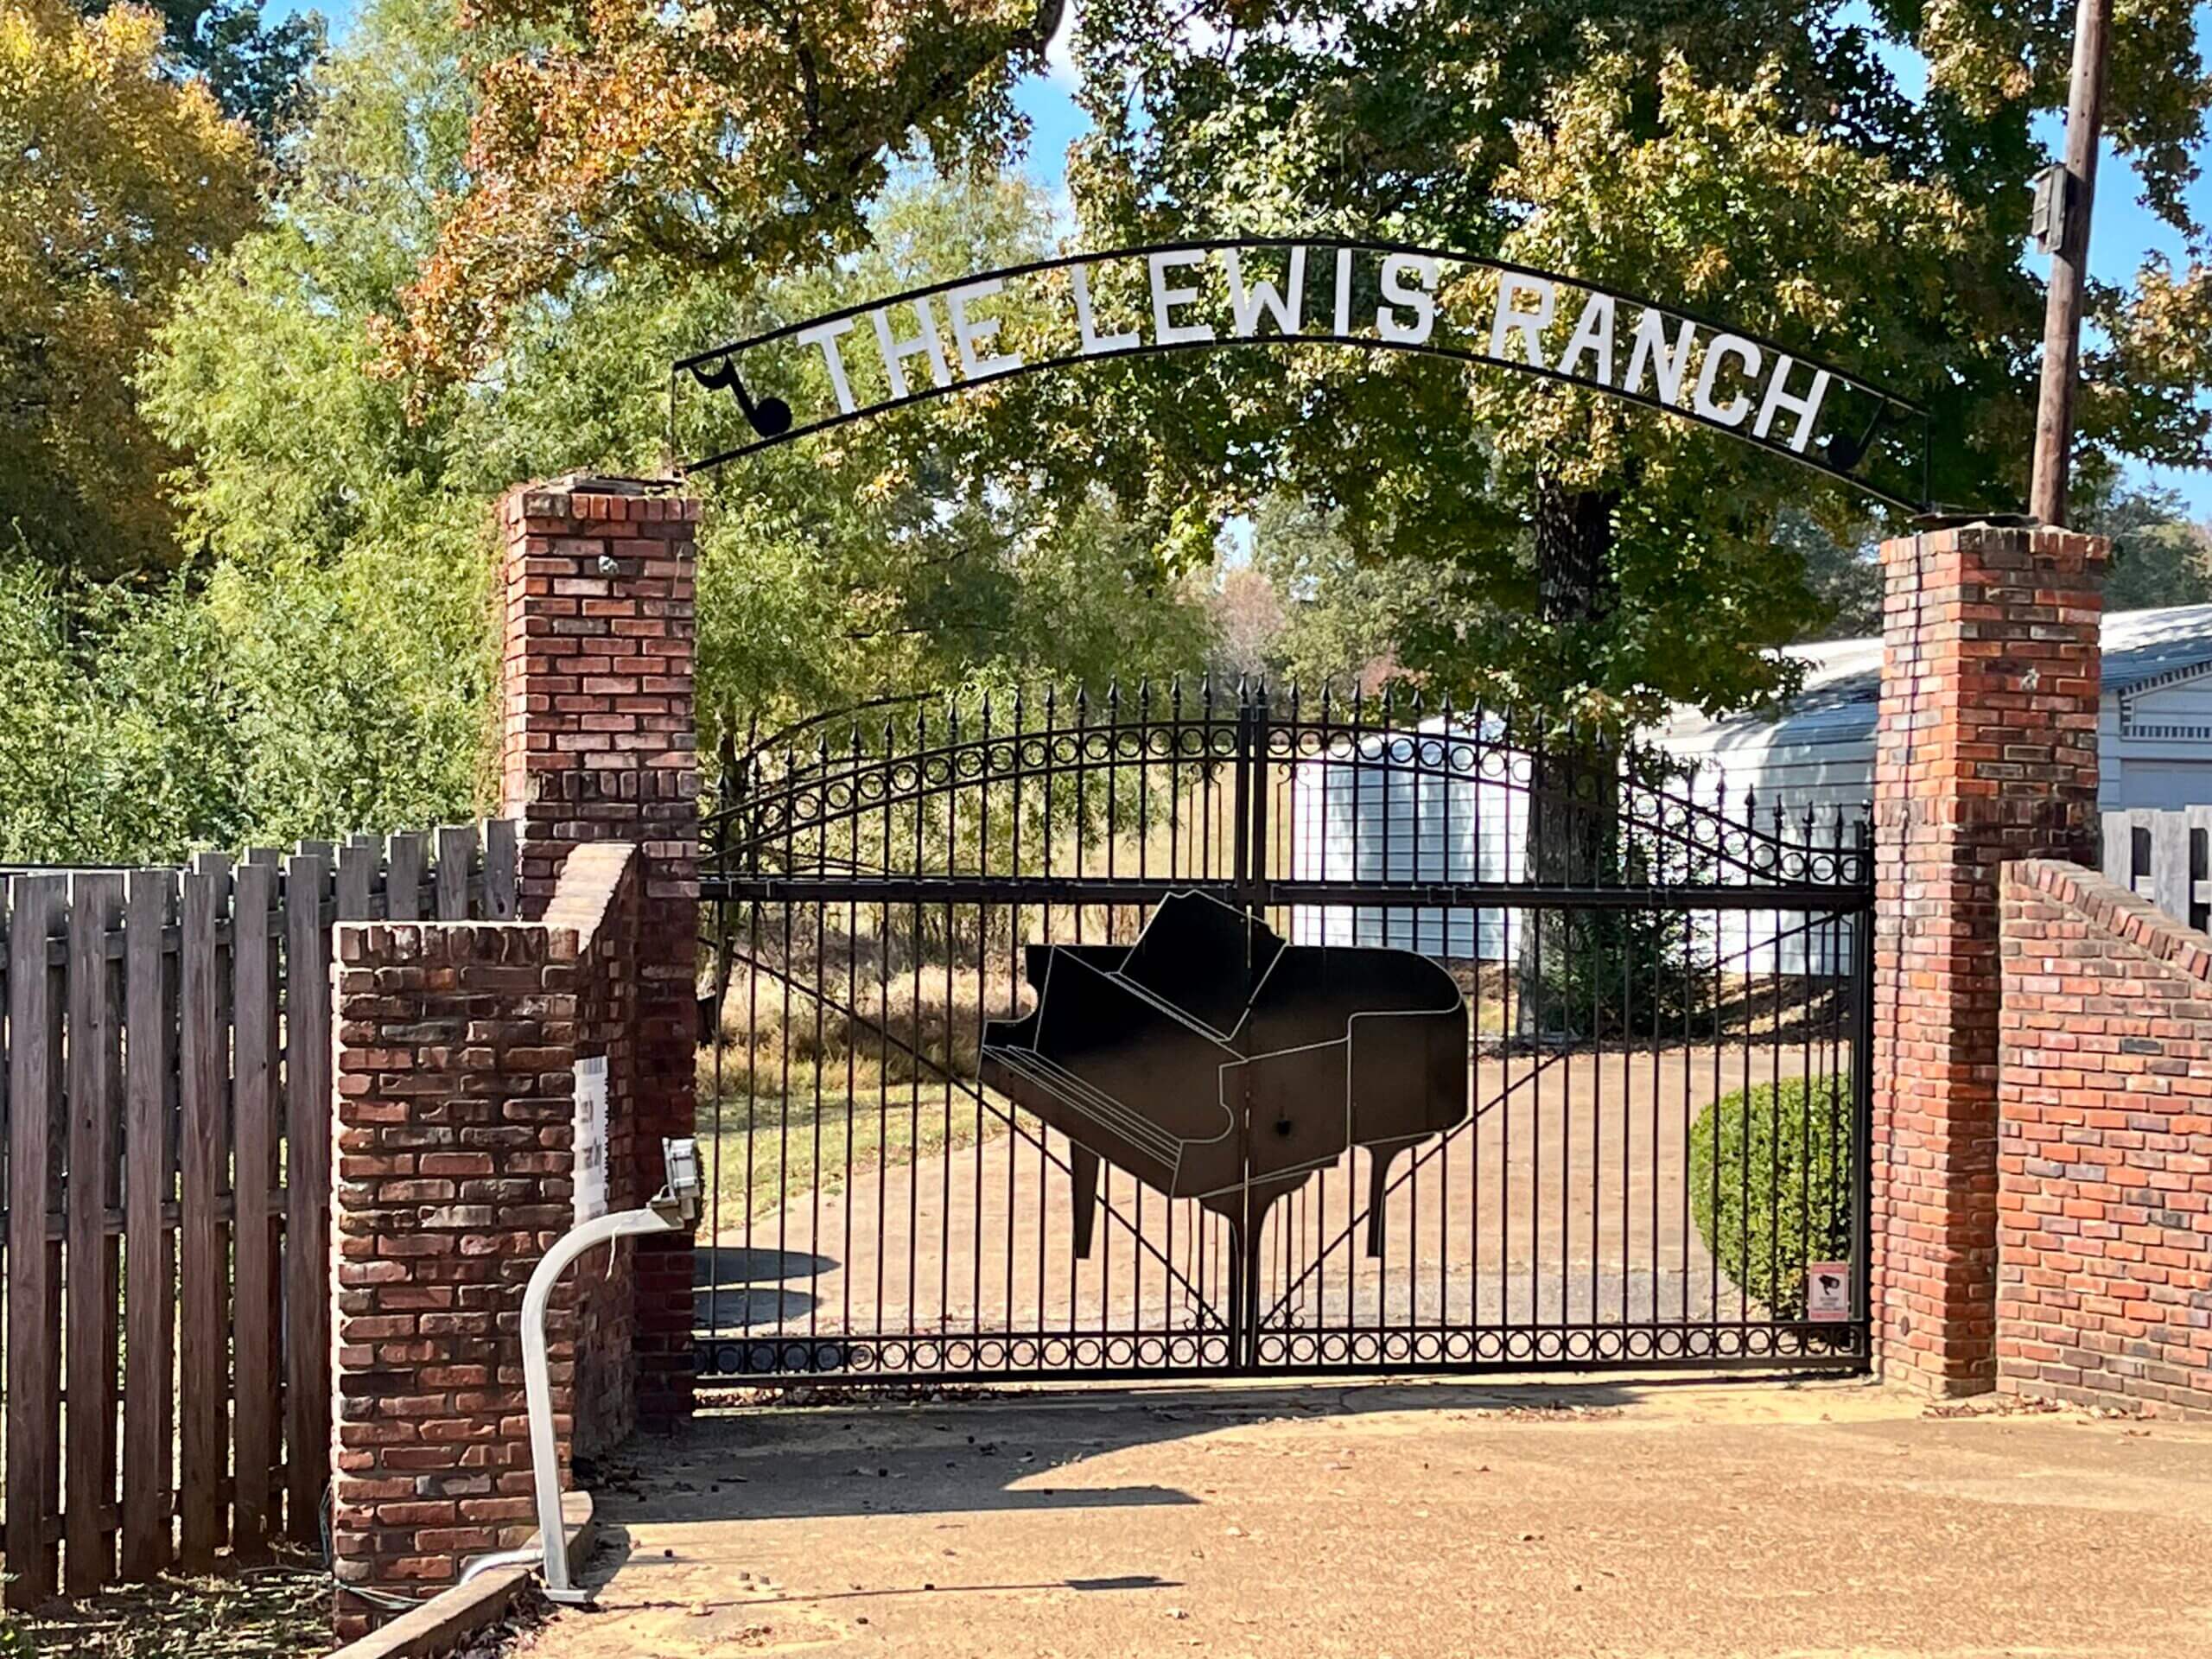 The Lewis Ranch up for sale | DeSoto County News